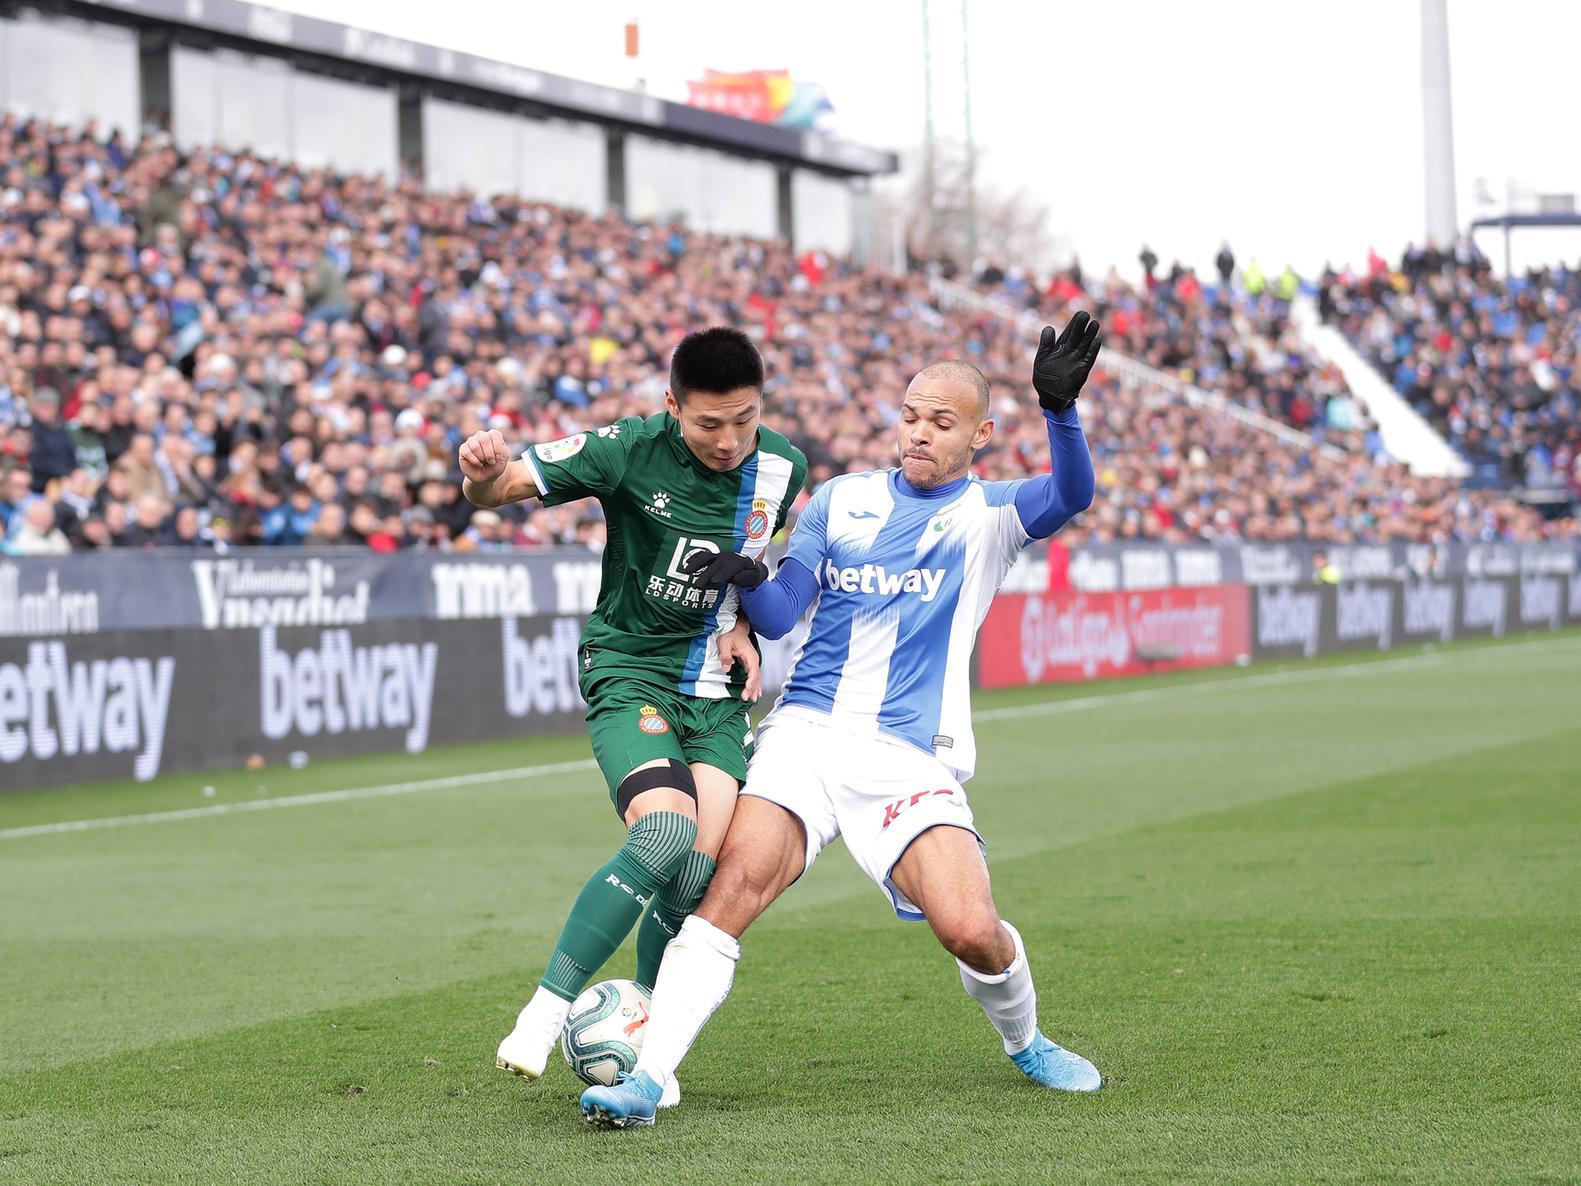 Former Middlesbrough forward Martin Braithwaite, now of Leganes, has been linked with a stunning move to Barcelona, as La Liga's champions look to snap up an emergency signing this month. (Sport Witness)